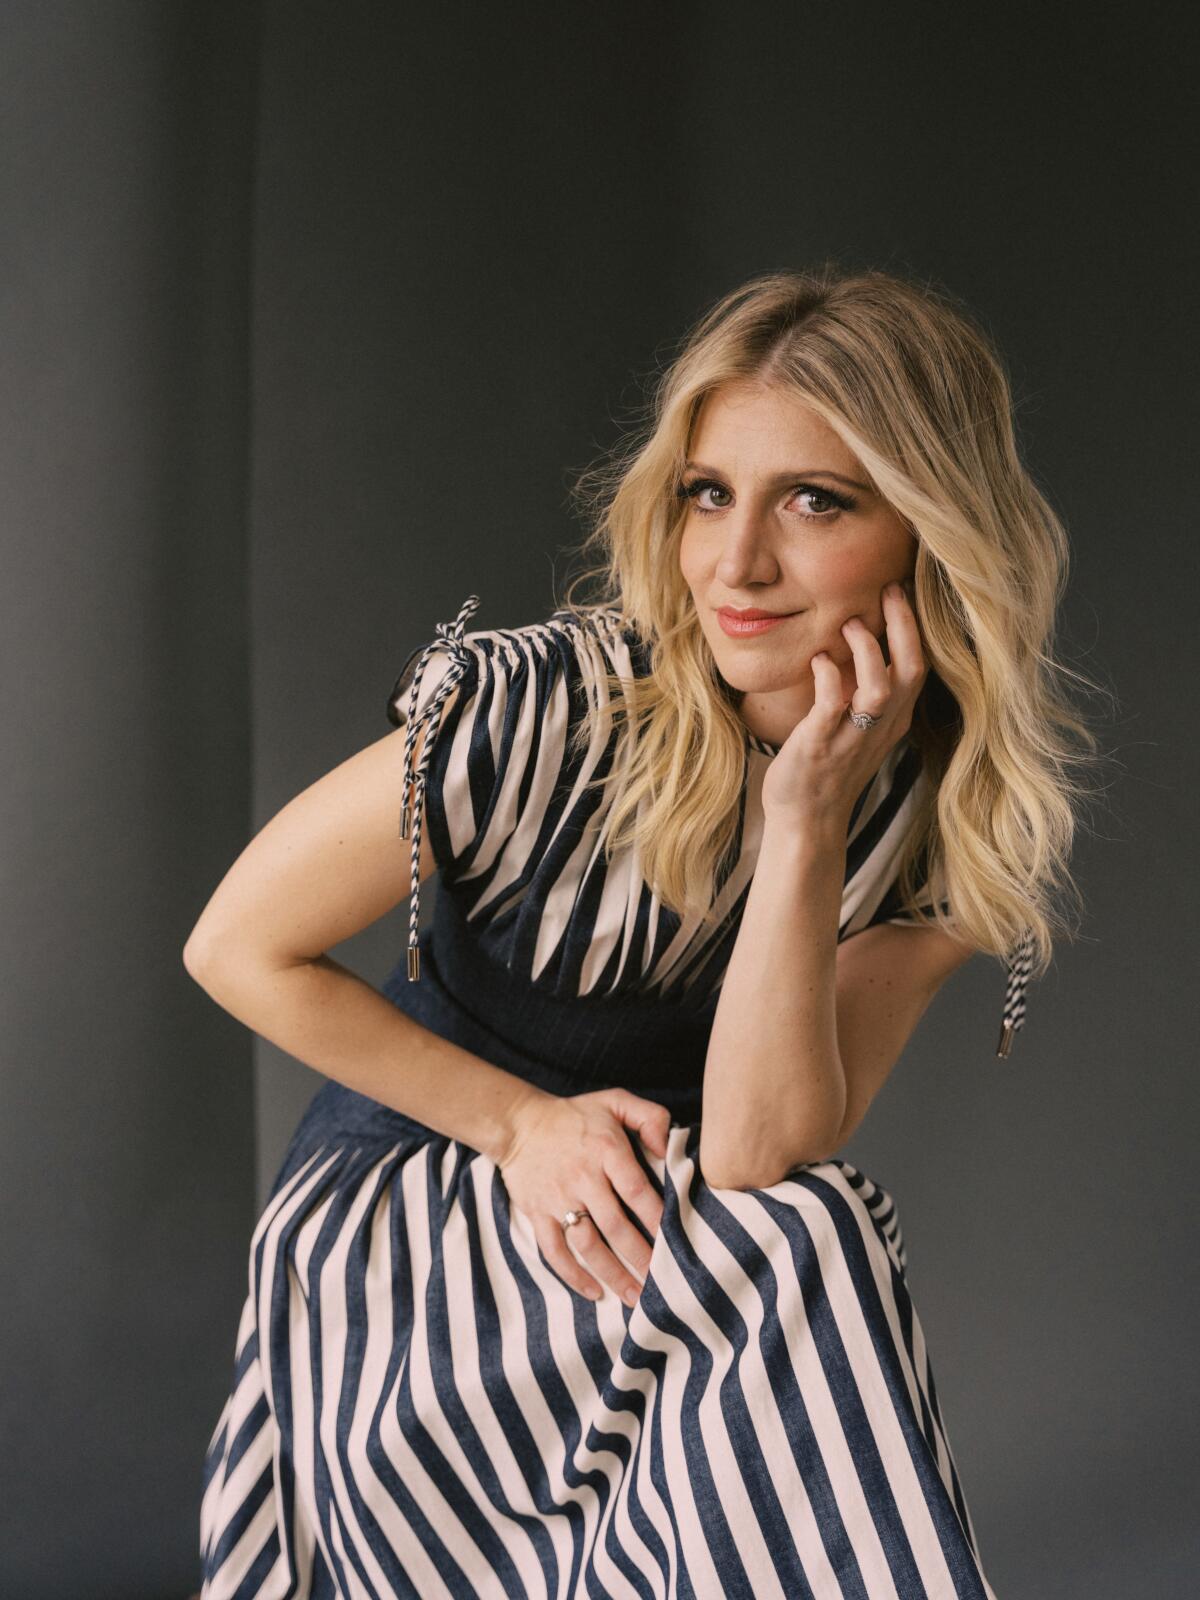 Annaleigh Ashford, in a blue and white striped dress, looks at the camera with her fingers on her cheek.